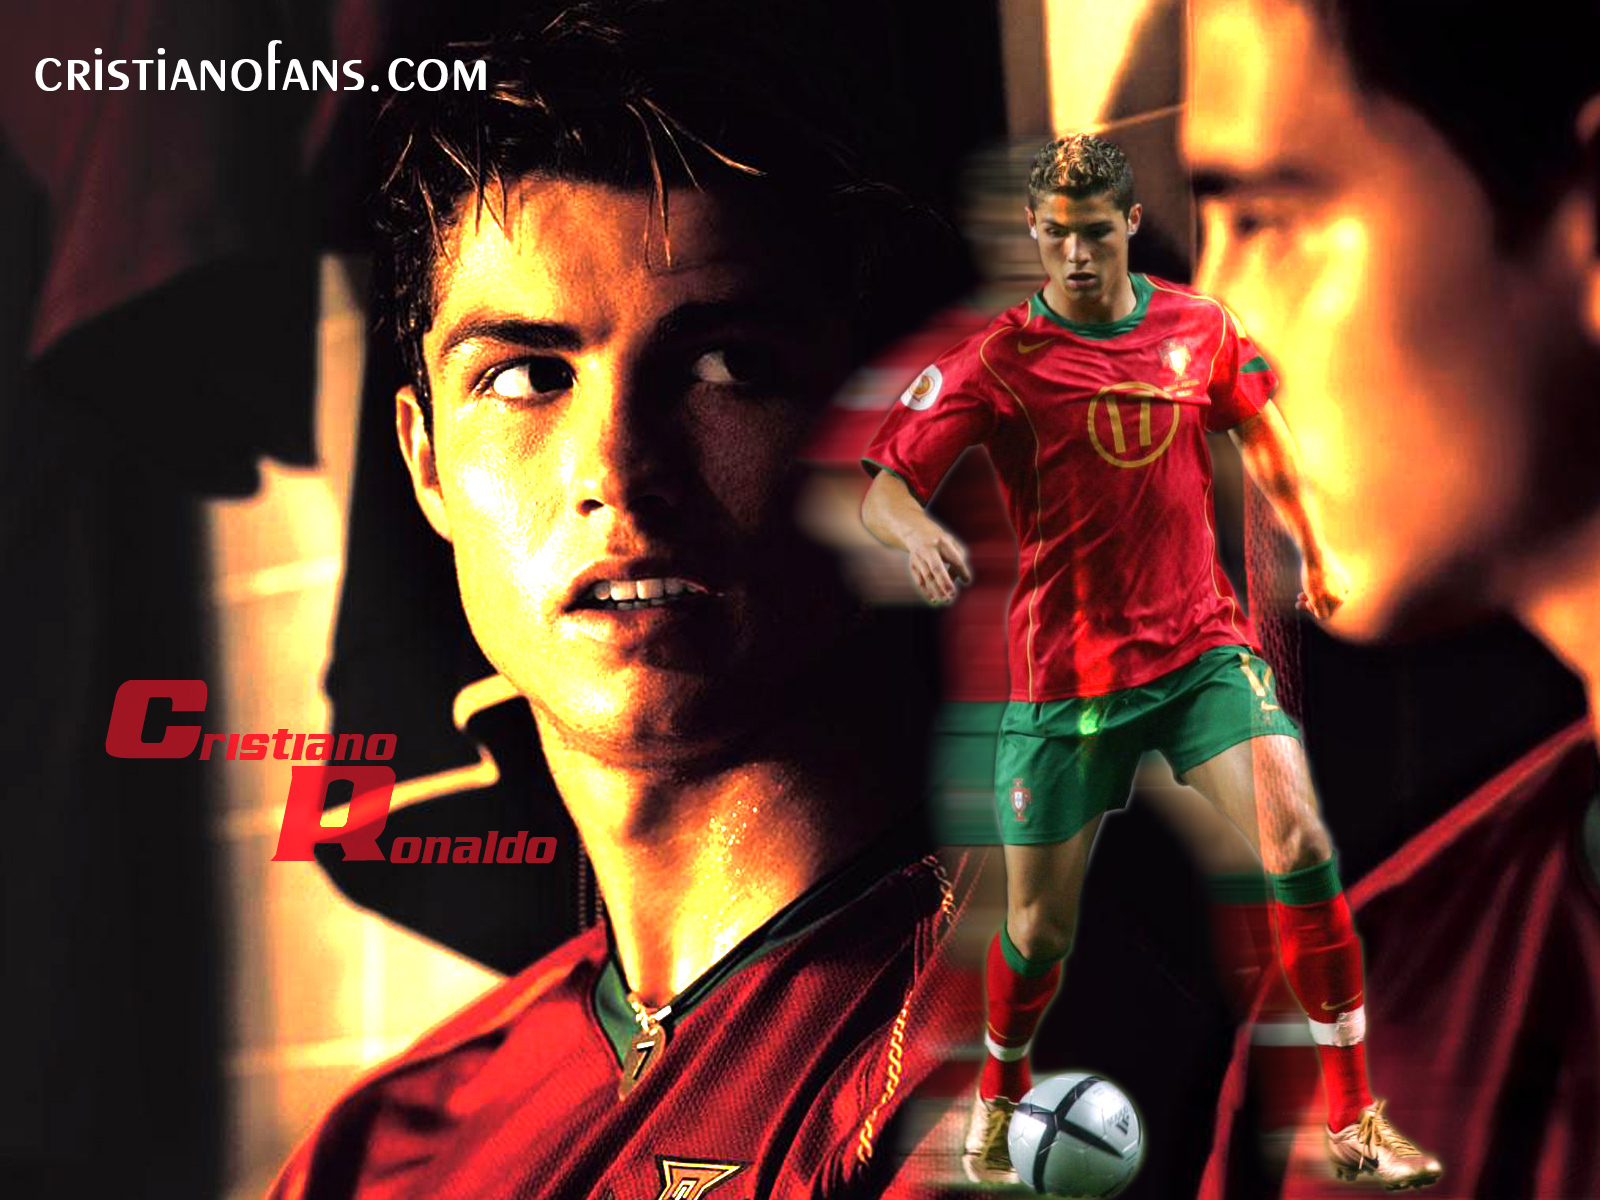 Cristiano Ronaldo Wallpapers,image,pictures,HD,wallpapers